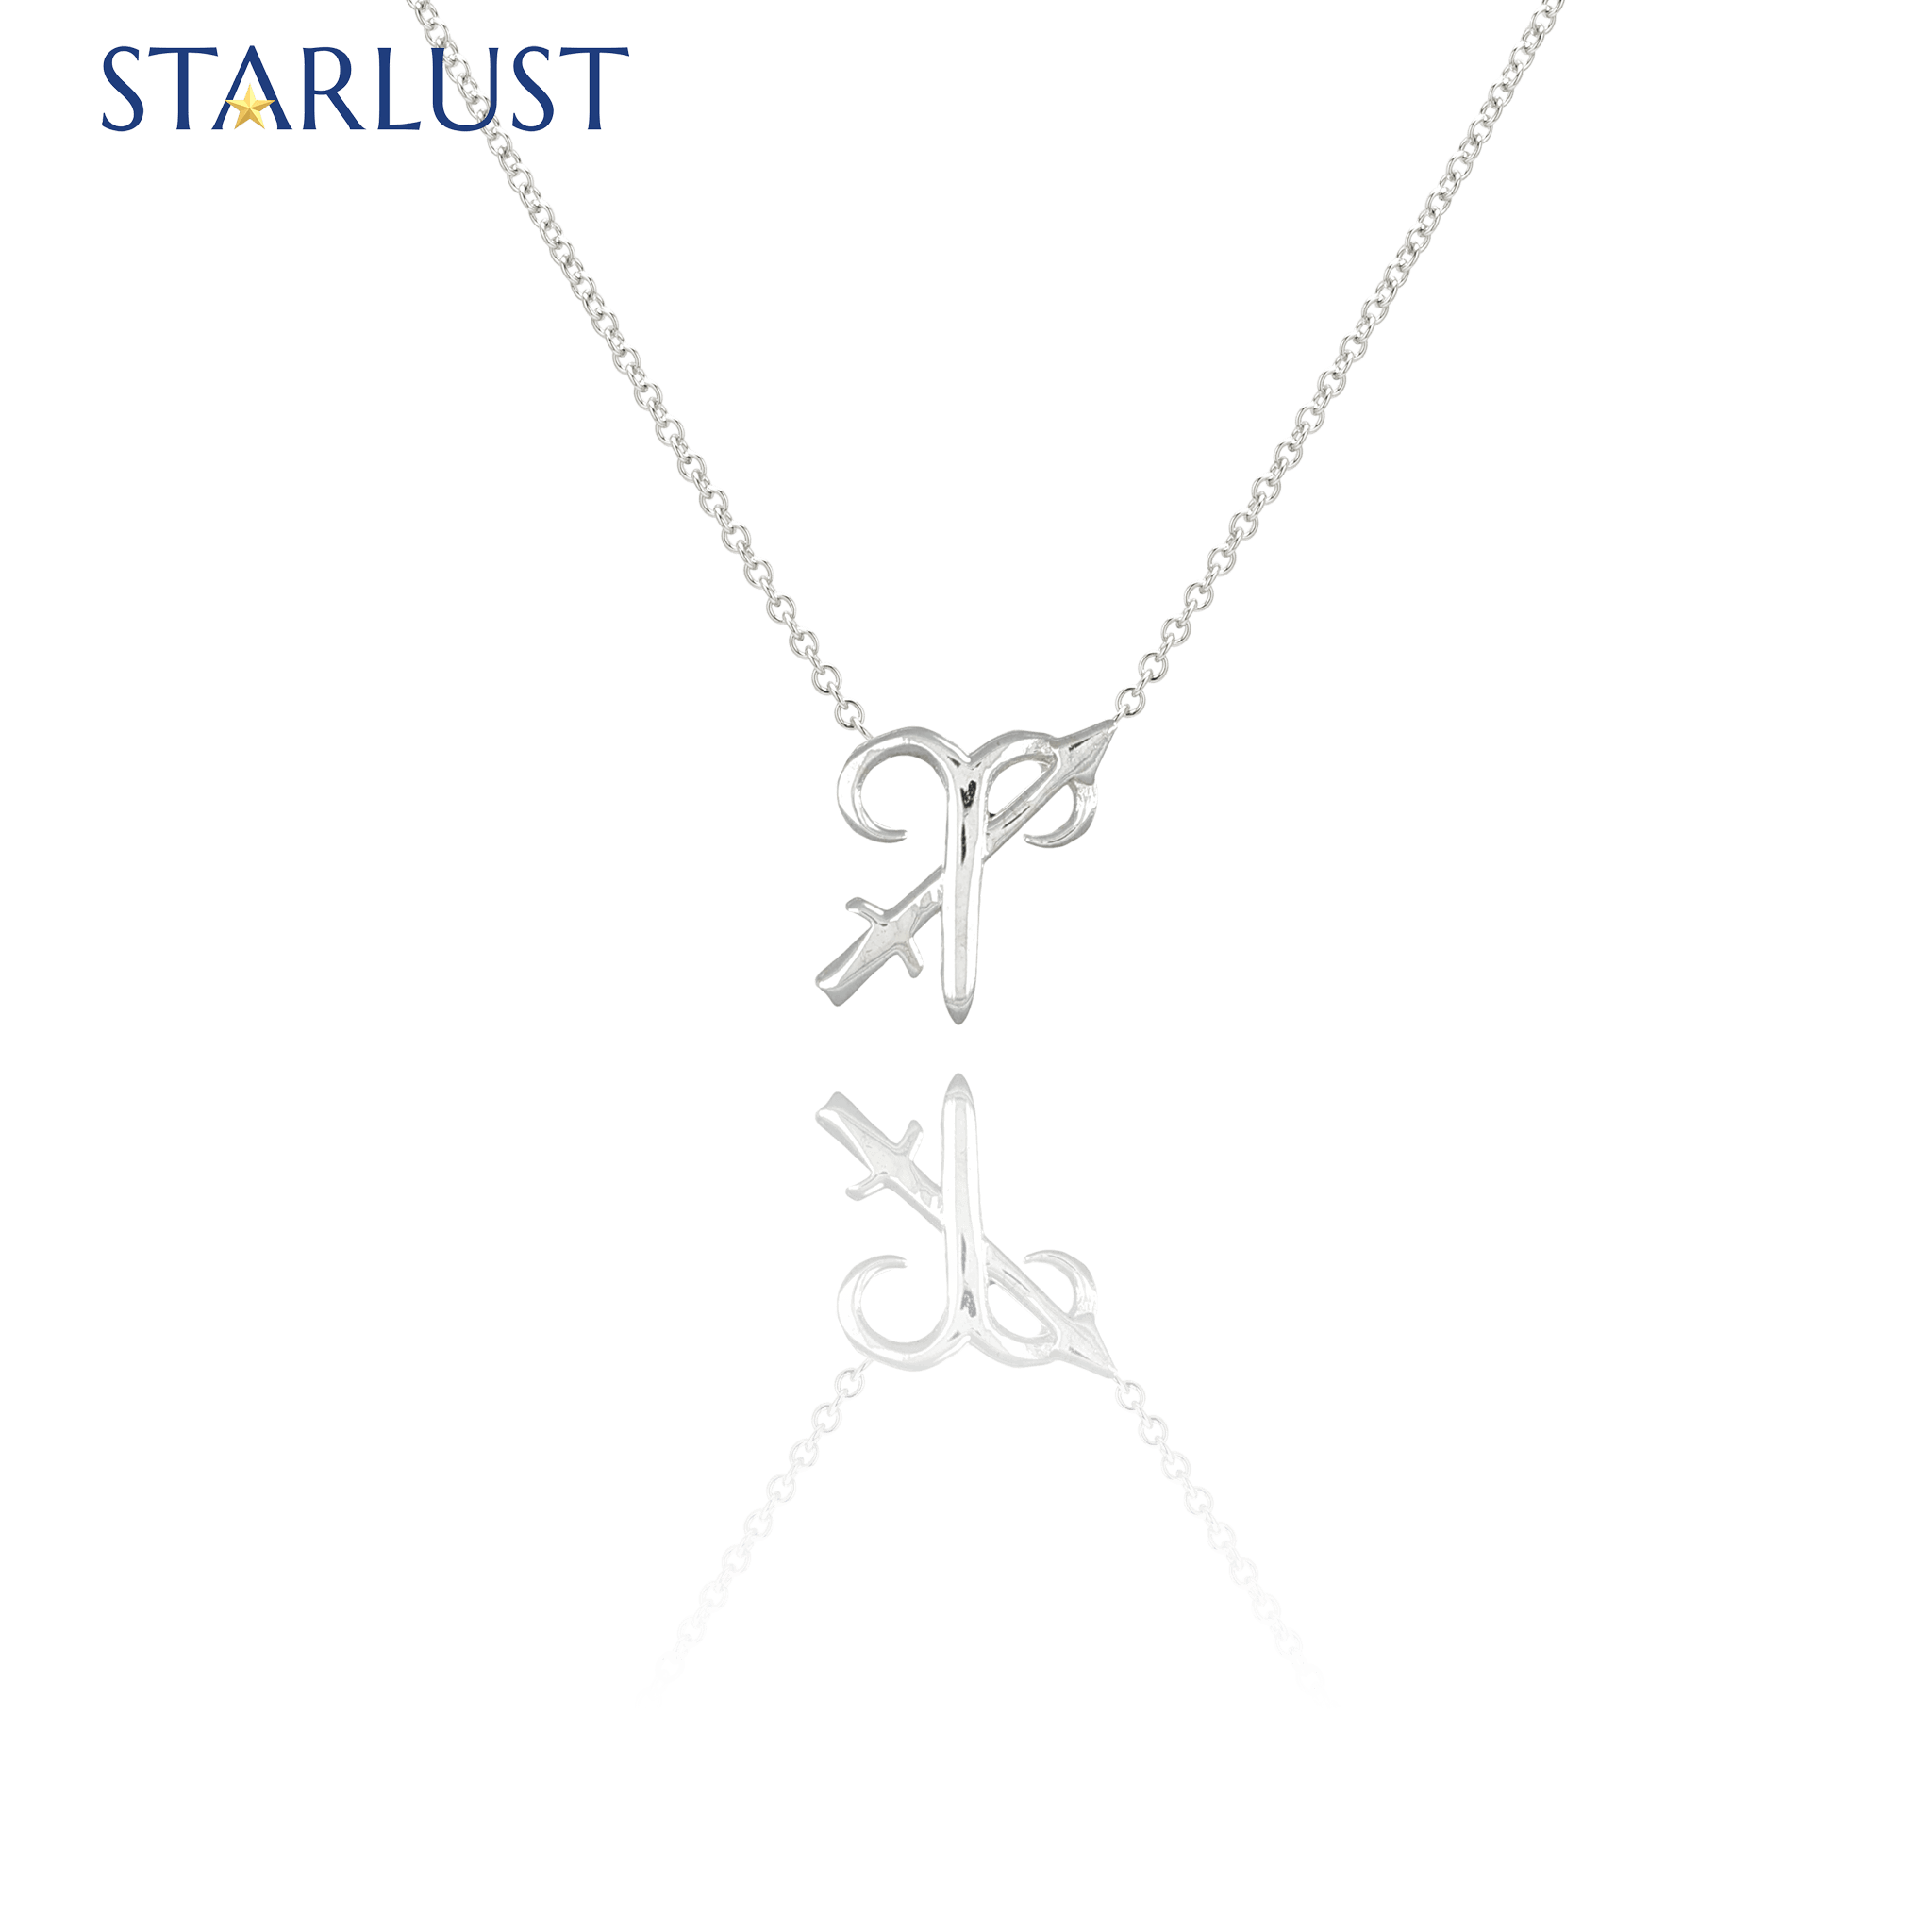 Aries and Sagittarius Necklace Sterling Silver Starlust